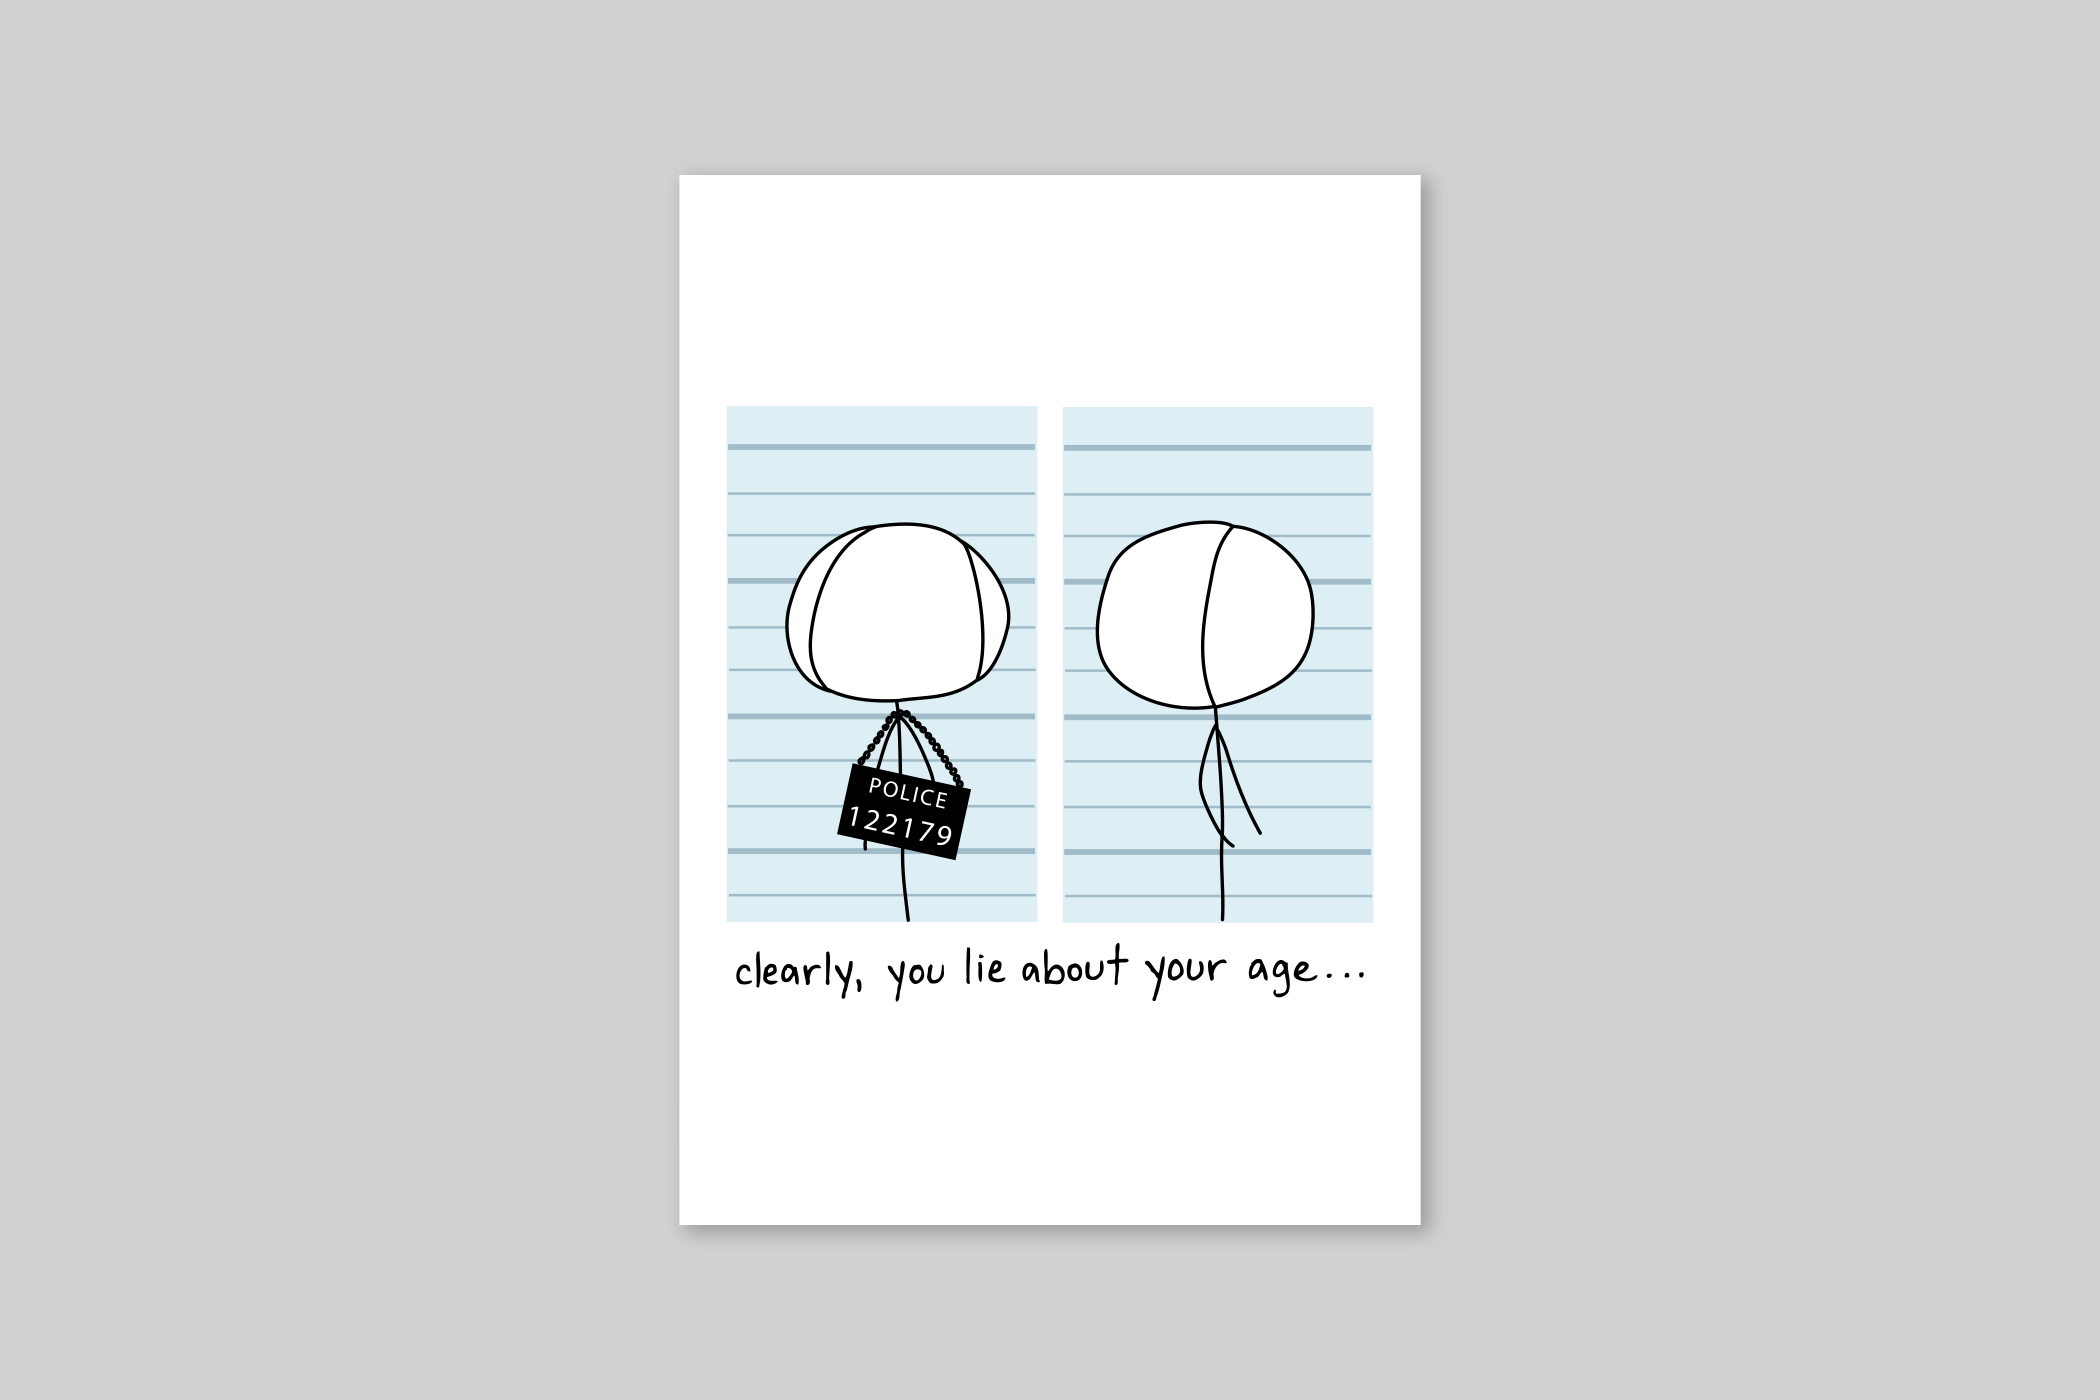 Liar humorous illustration from Mean Cards range of greeting cards by Icon.